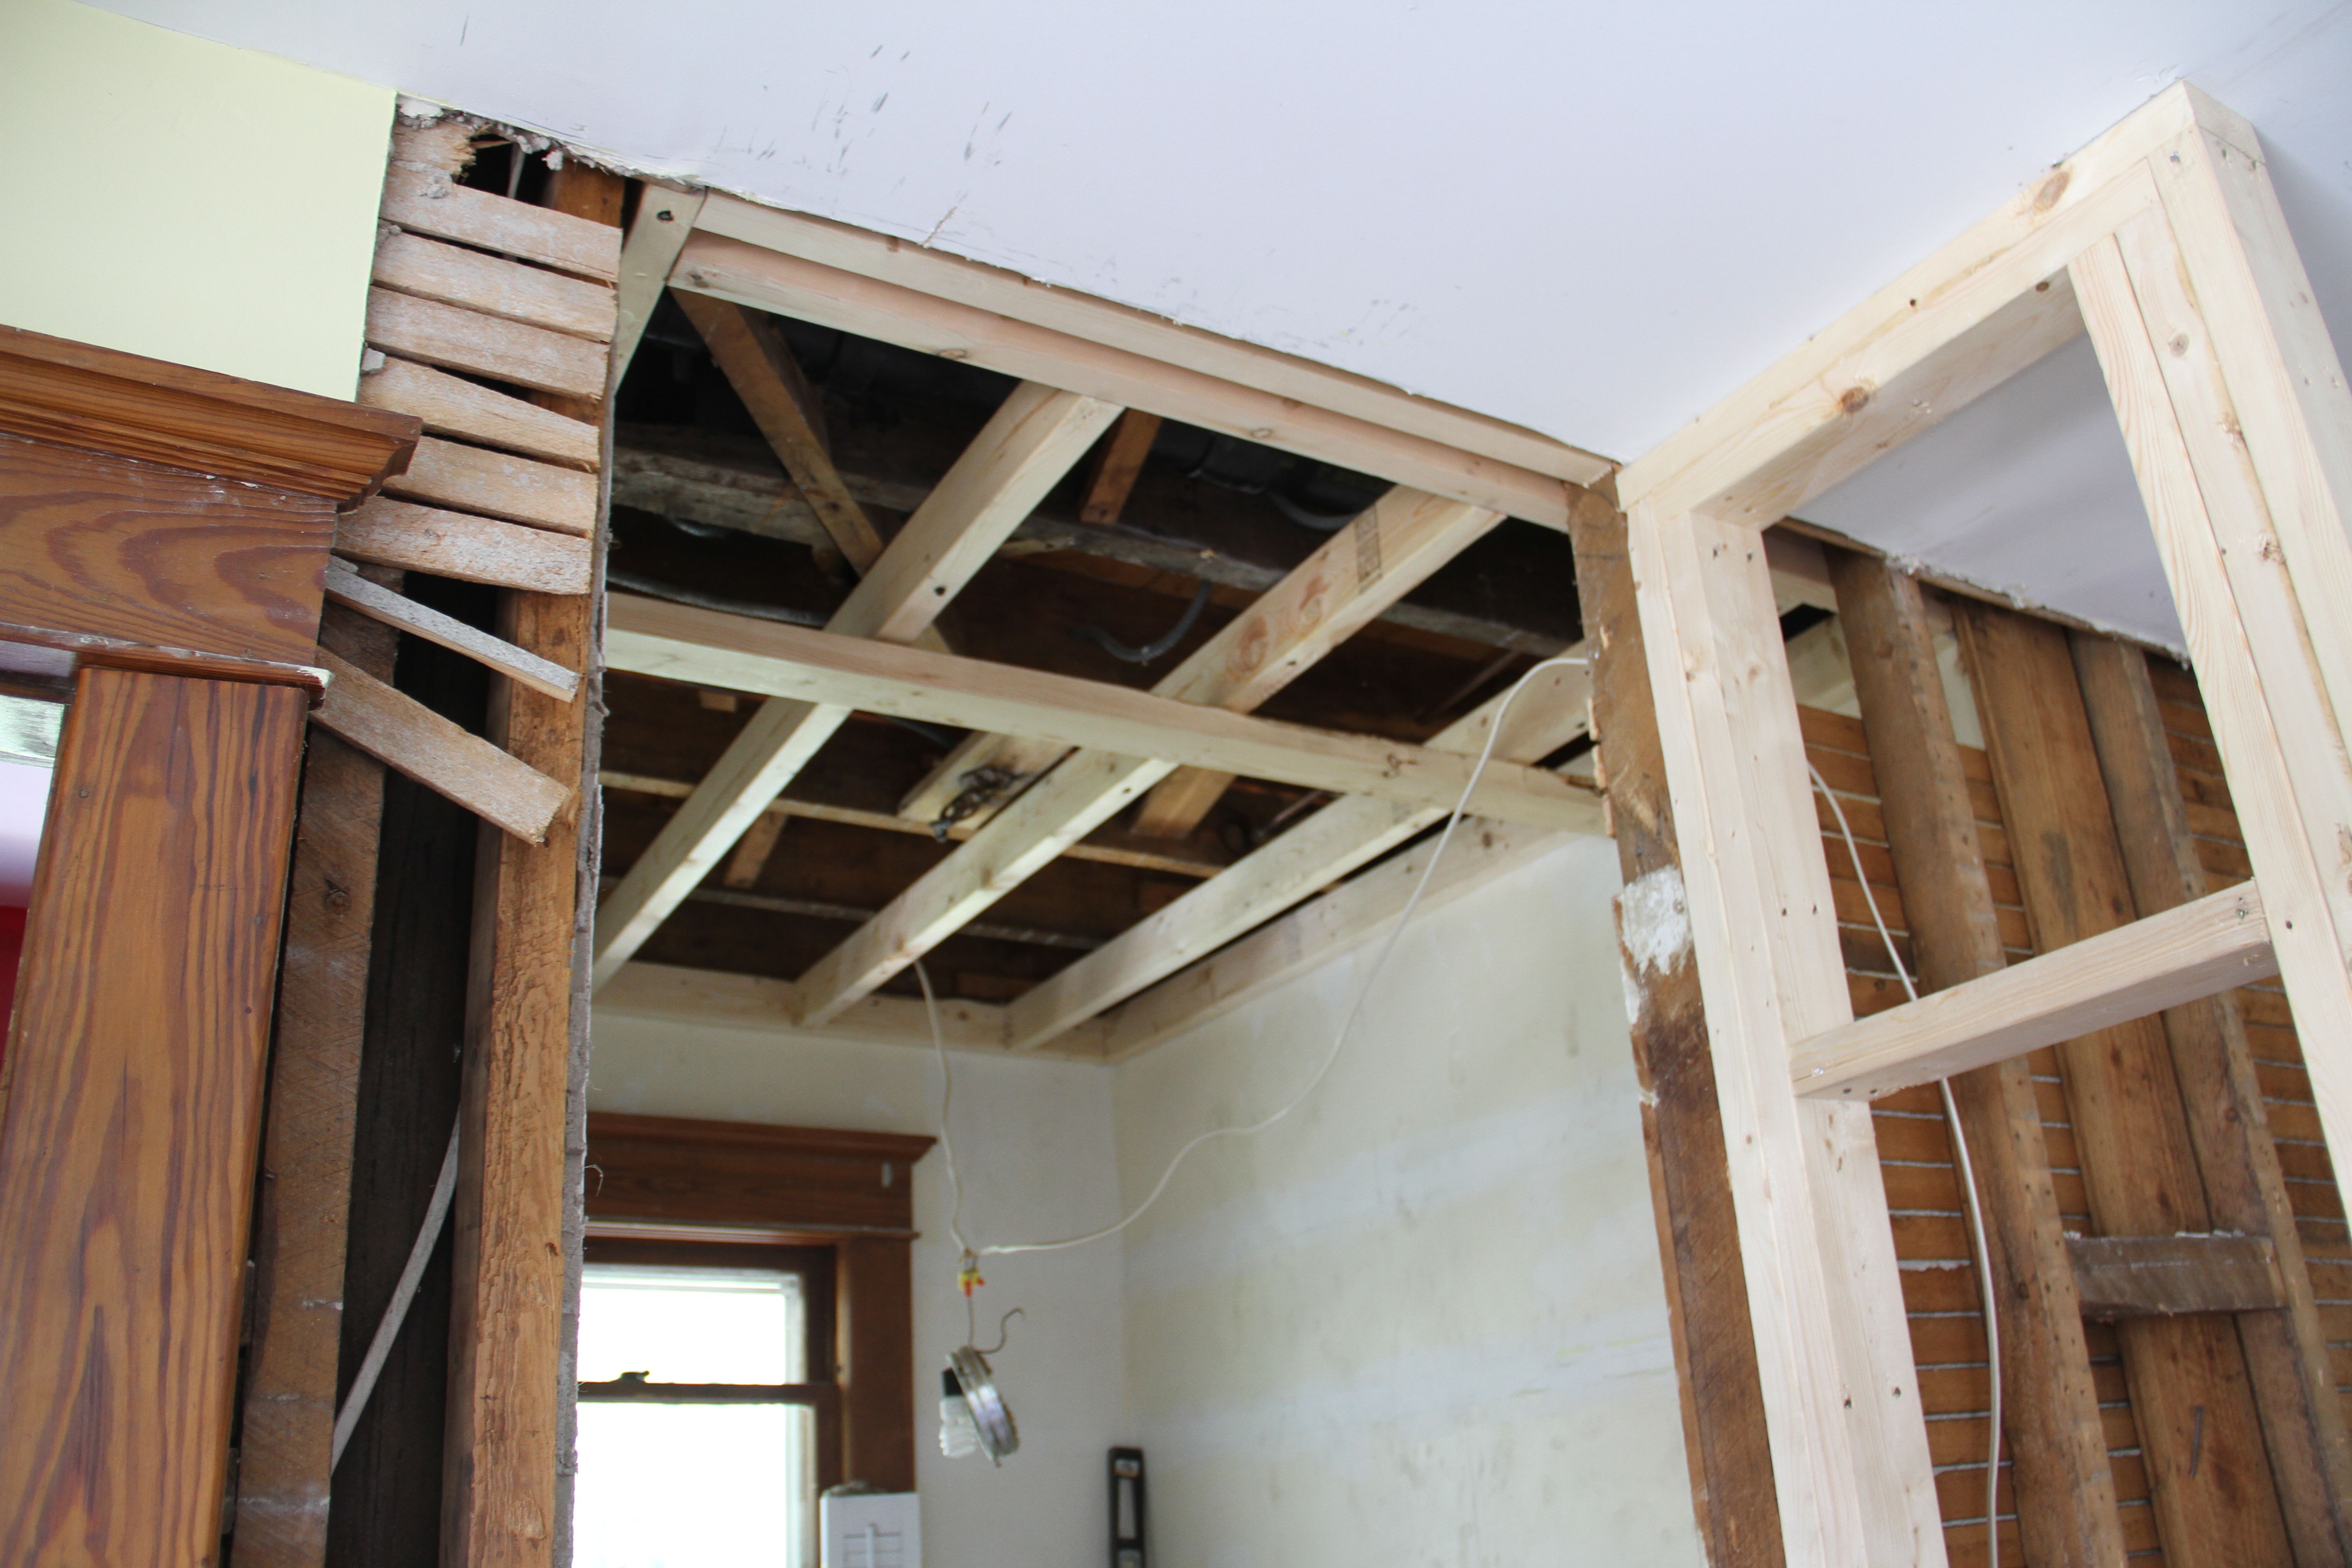 Ceiling framed up, wall to powder room in place an awaiting approval from Mrs K.